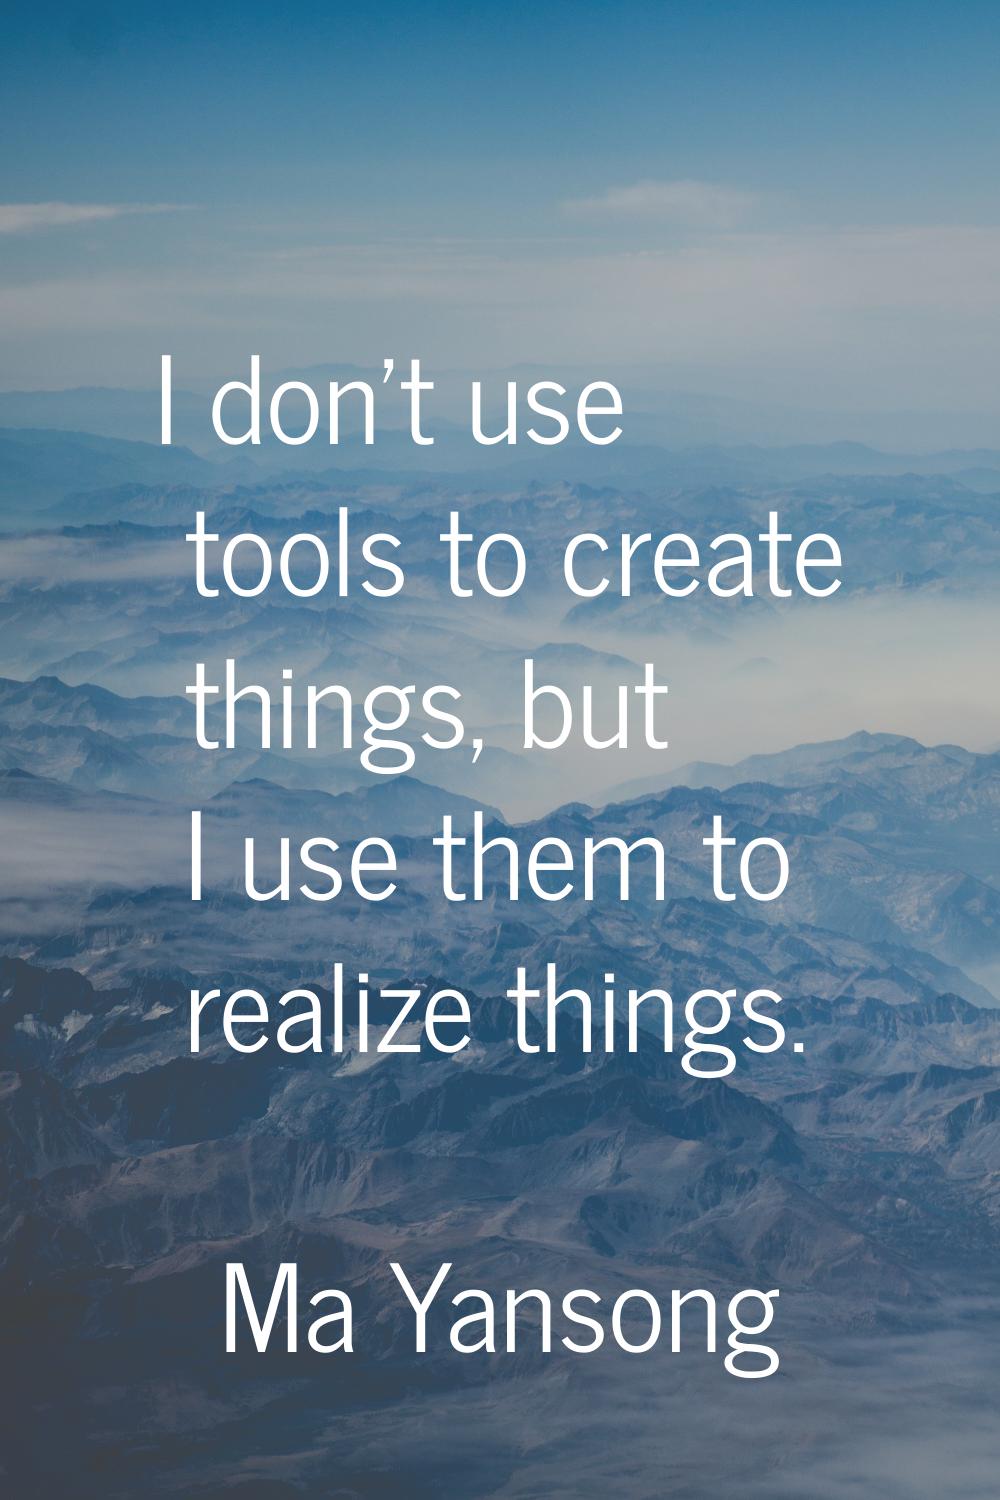 I don't use tools to create things, but I use them to realize things.